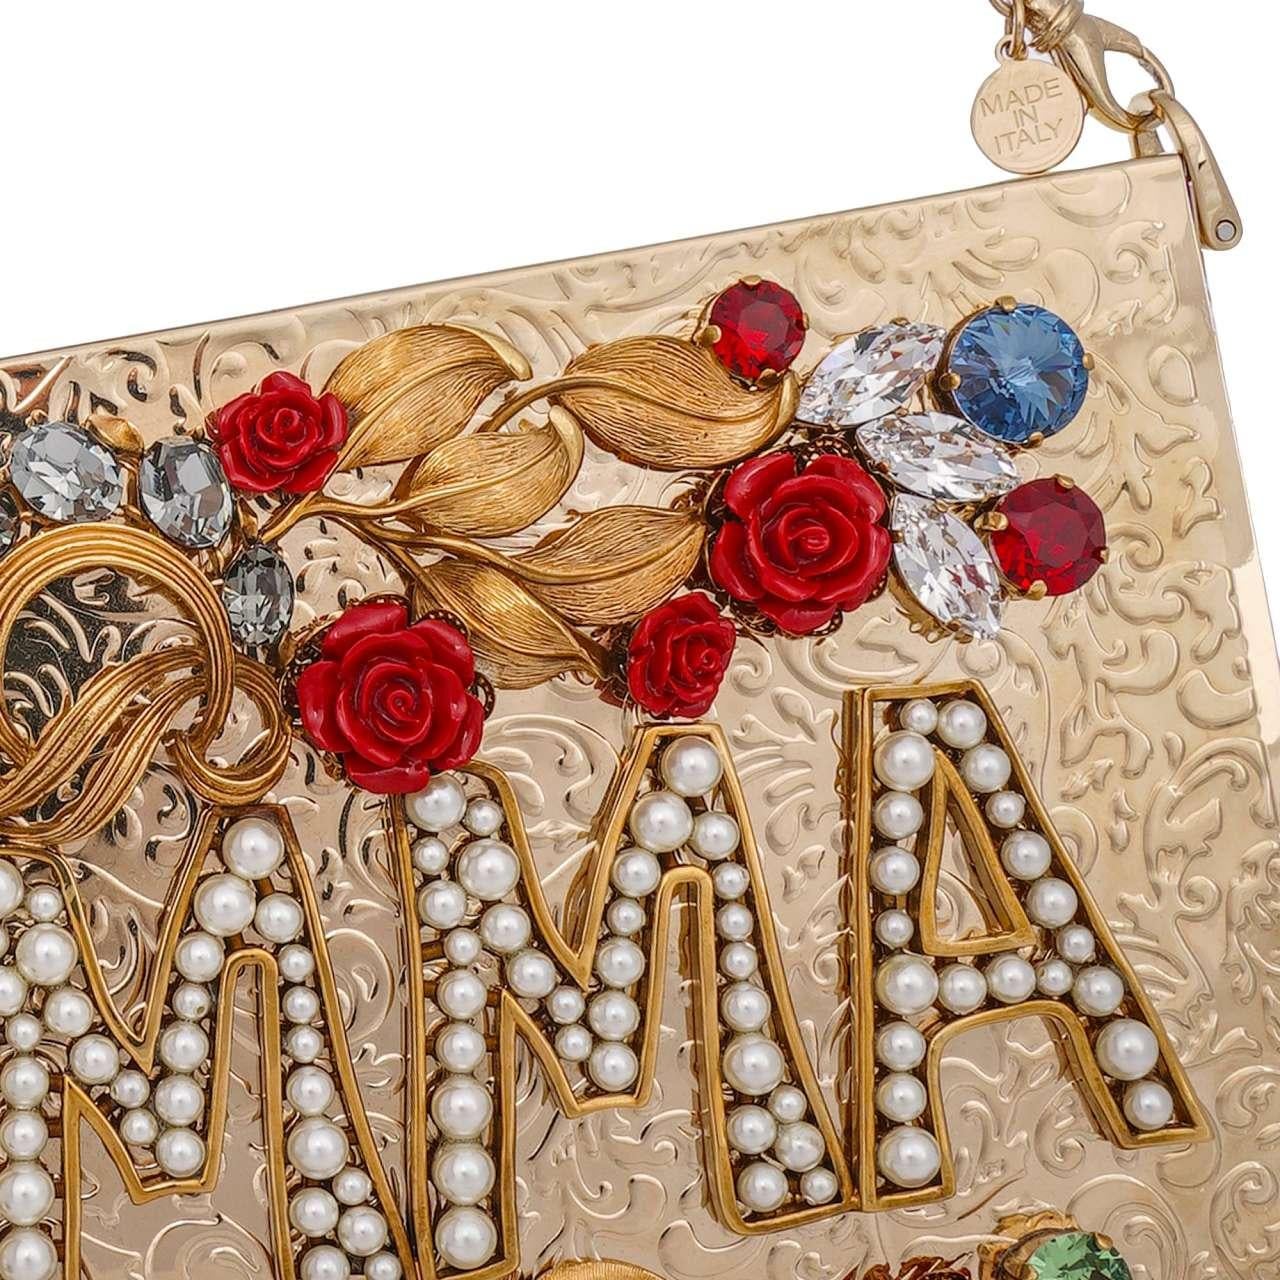 Women's Dolce & Gabbana - Crystals and Roses Embellished Box Clutch Bag MAMMA Gold